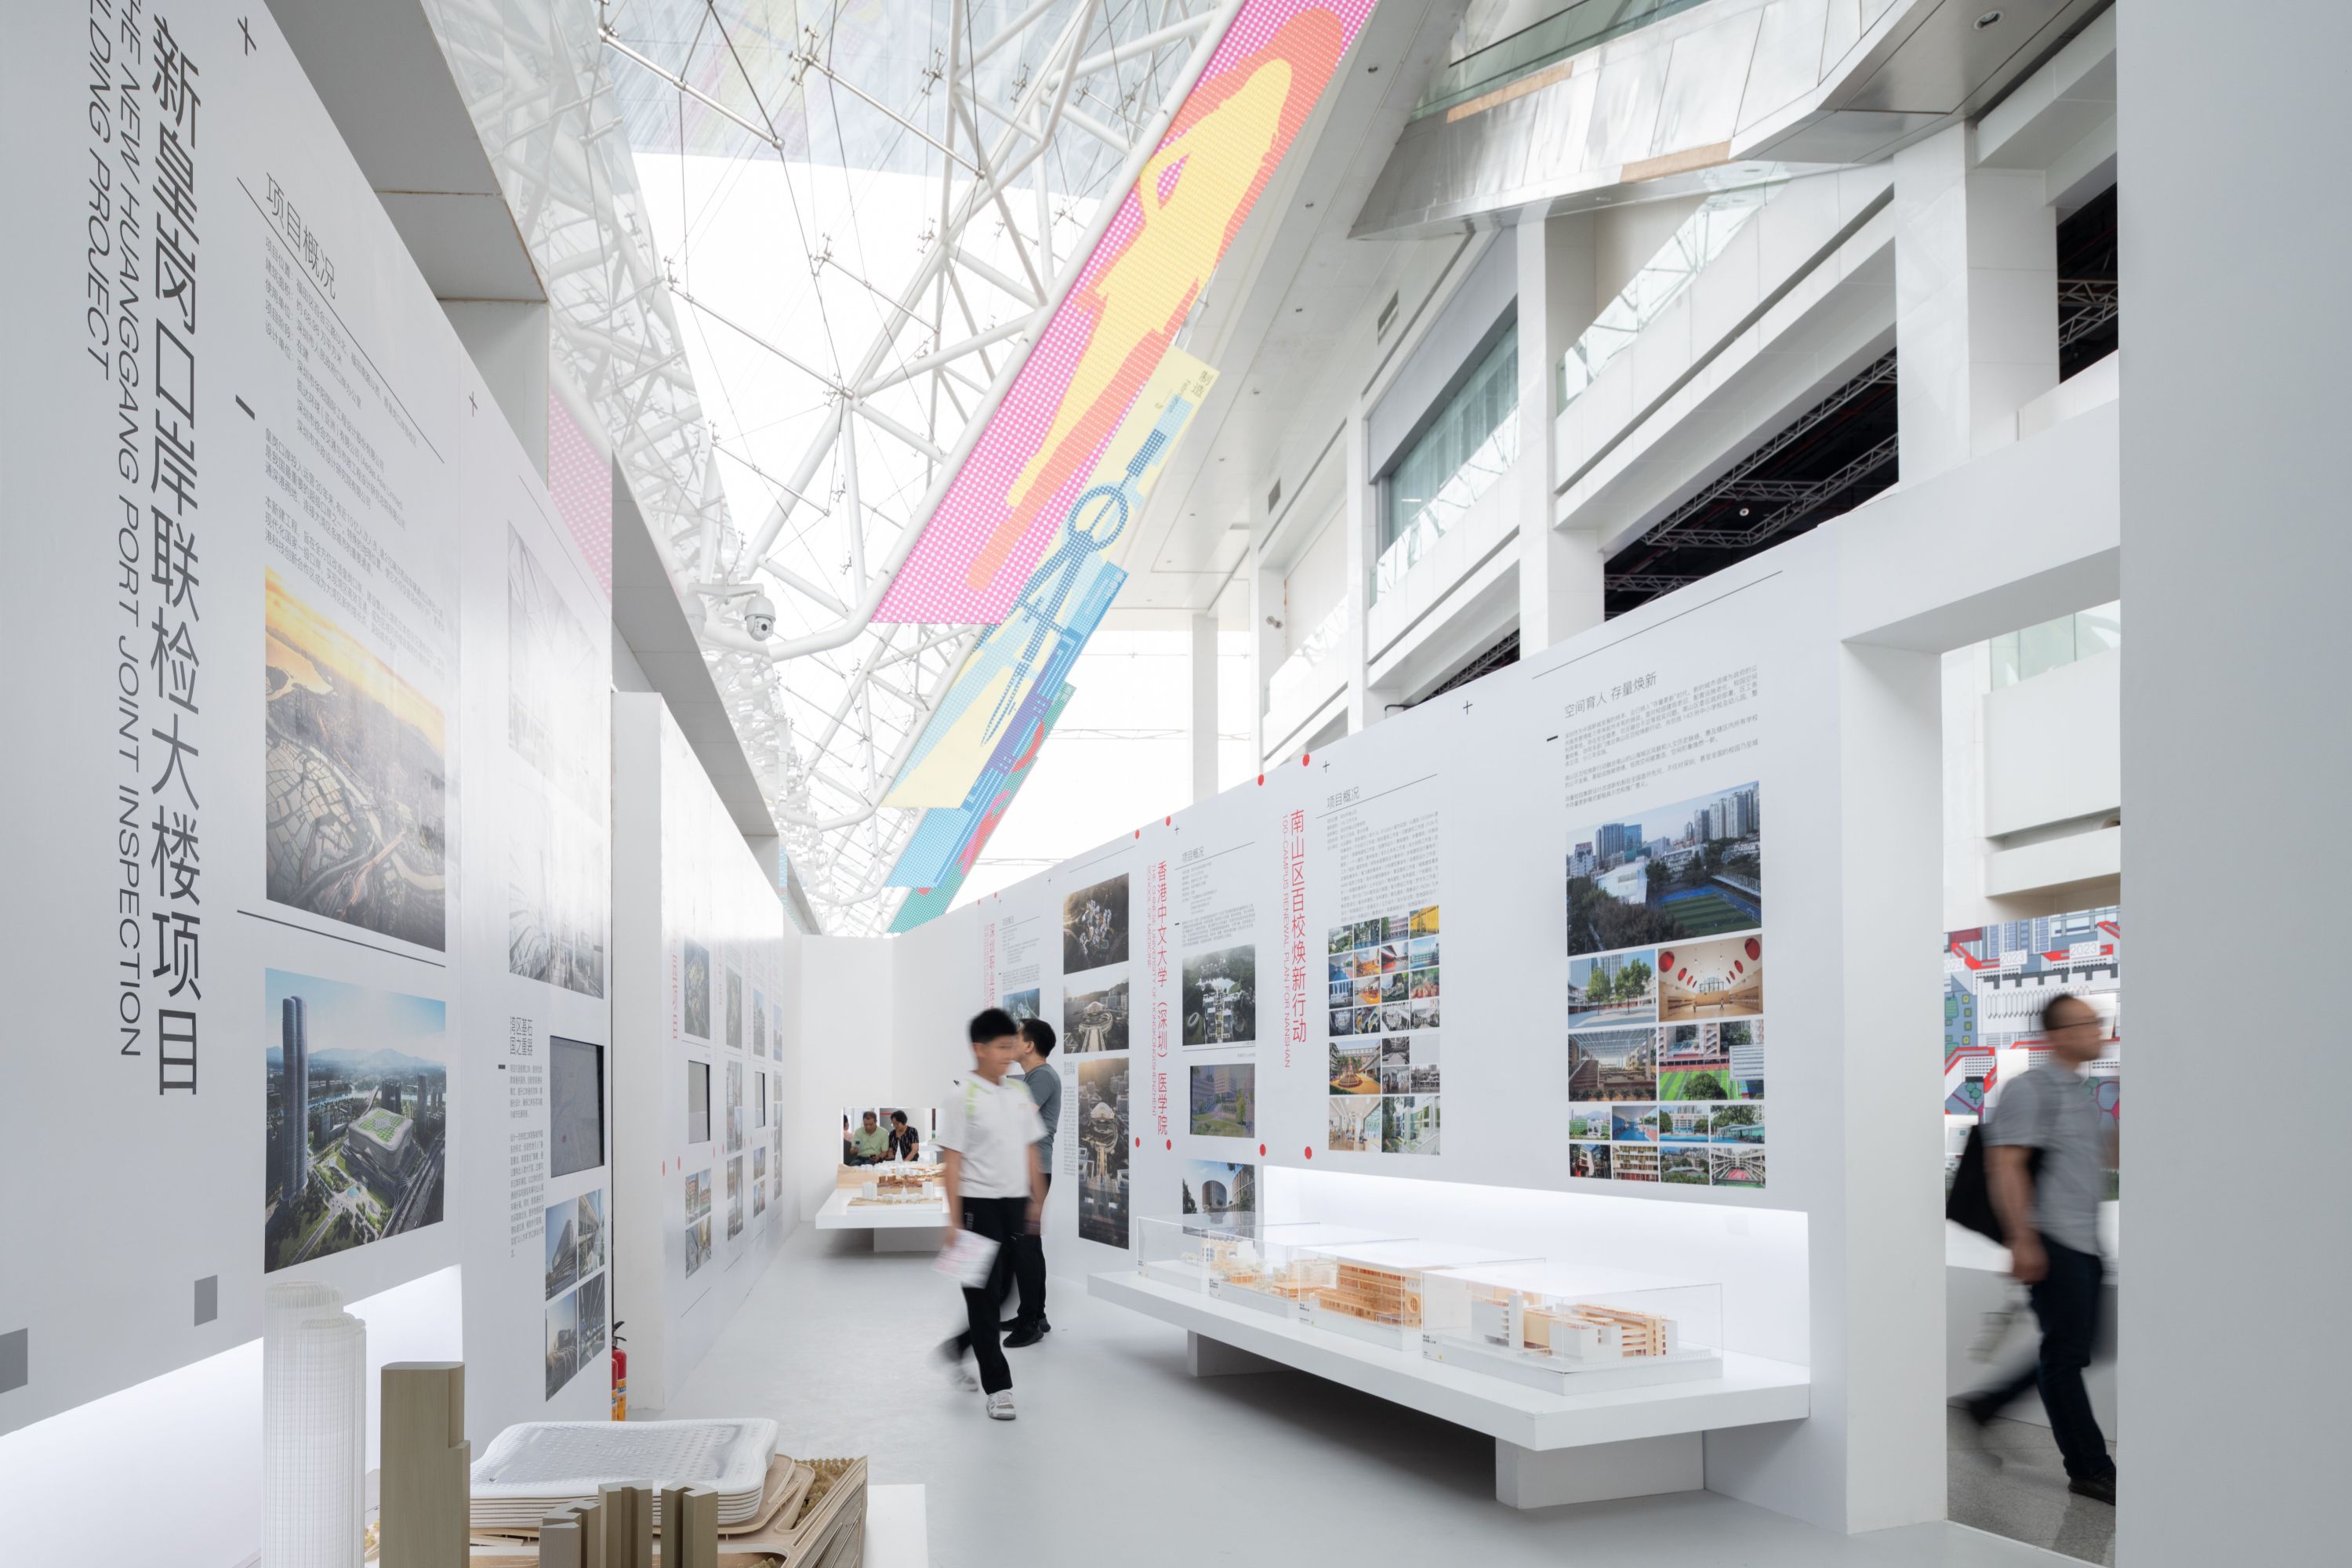 2024 Shenzhen Public Building Achievements Exhibition Officially Opened at the Shenzhen Civic Center, with Zigeng Wang as the Curator and PILLS Responsible for Exhibition Design